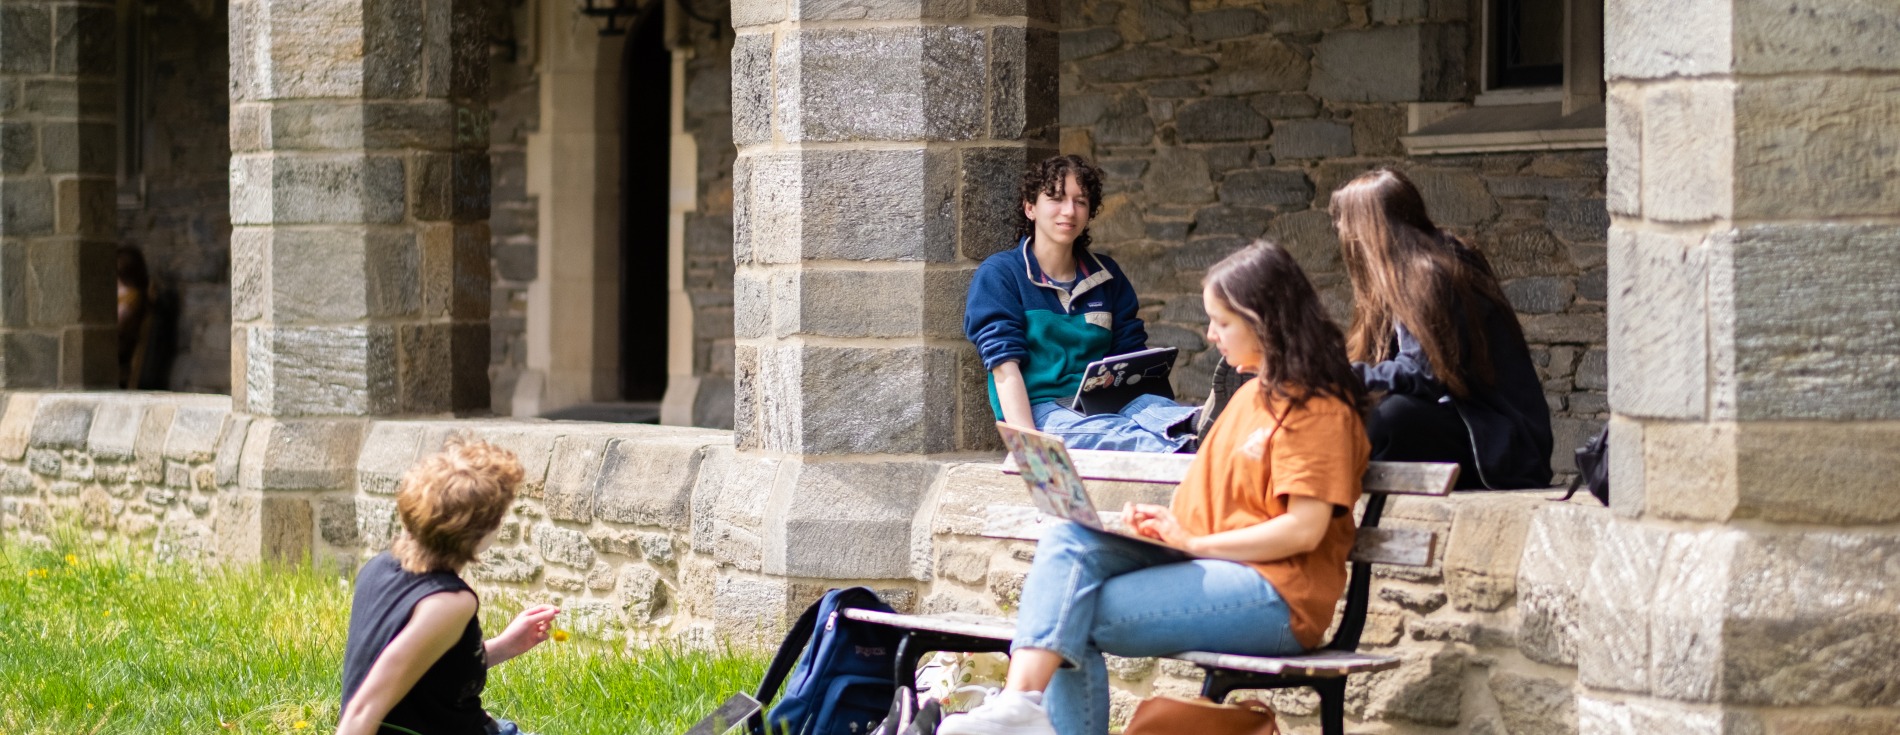 Students sitting in Cloisters